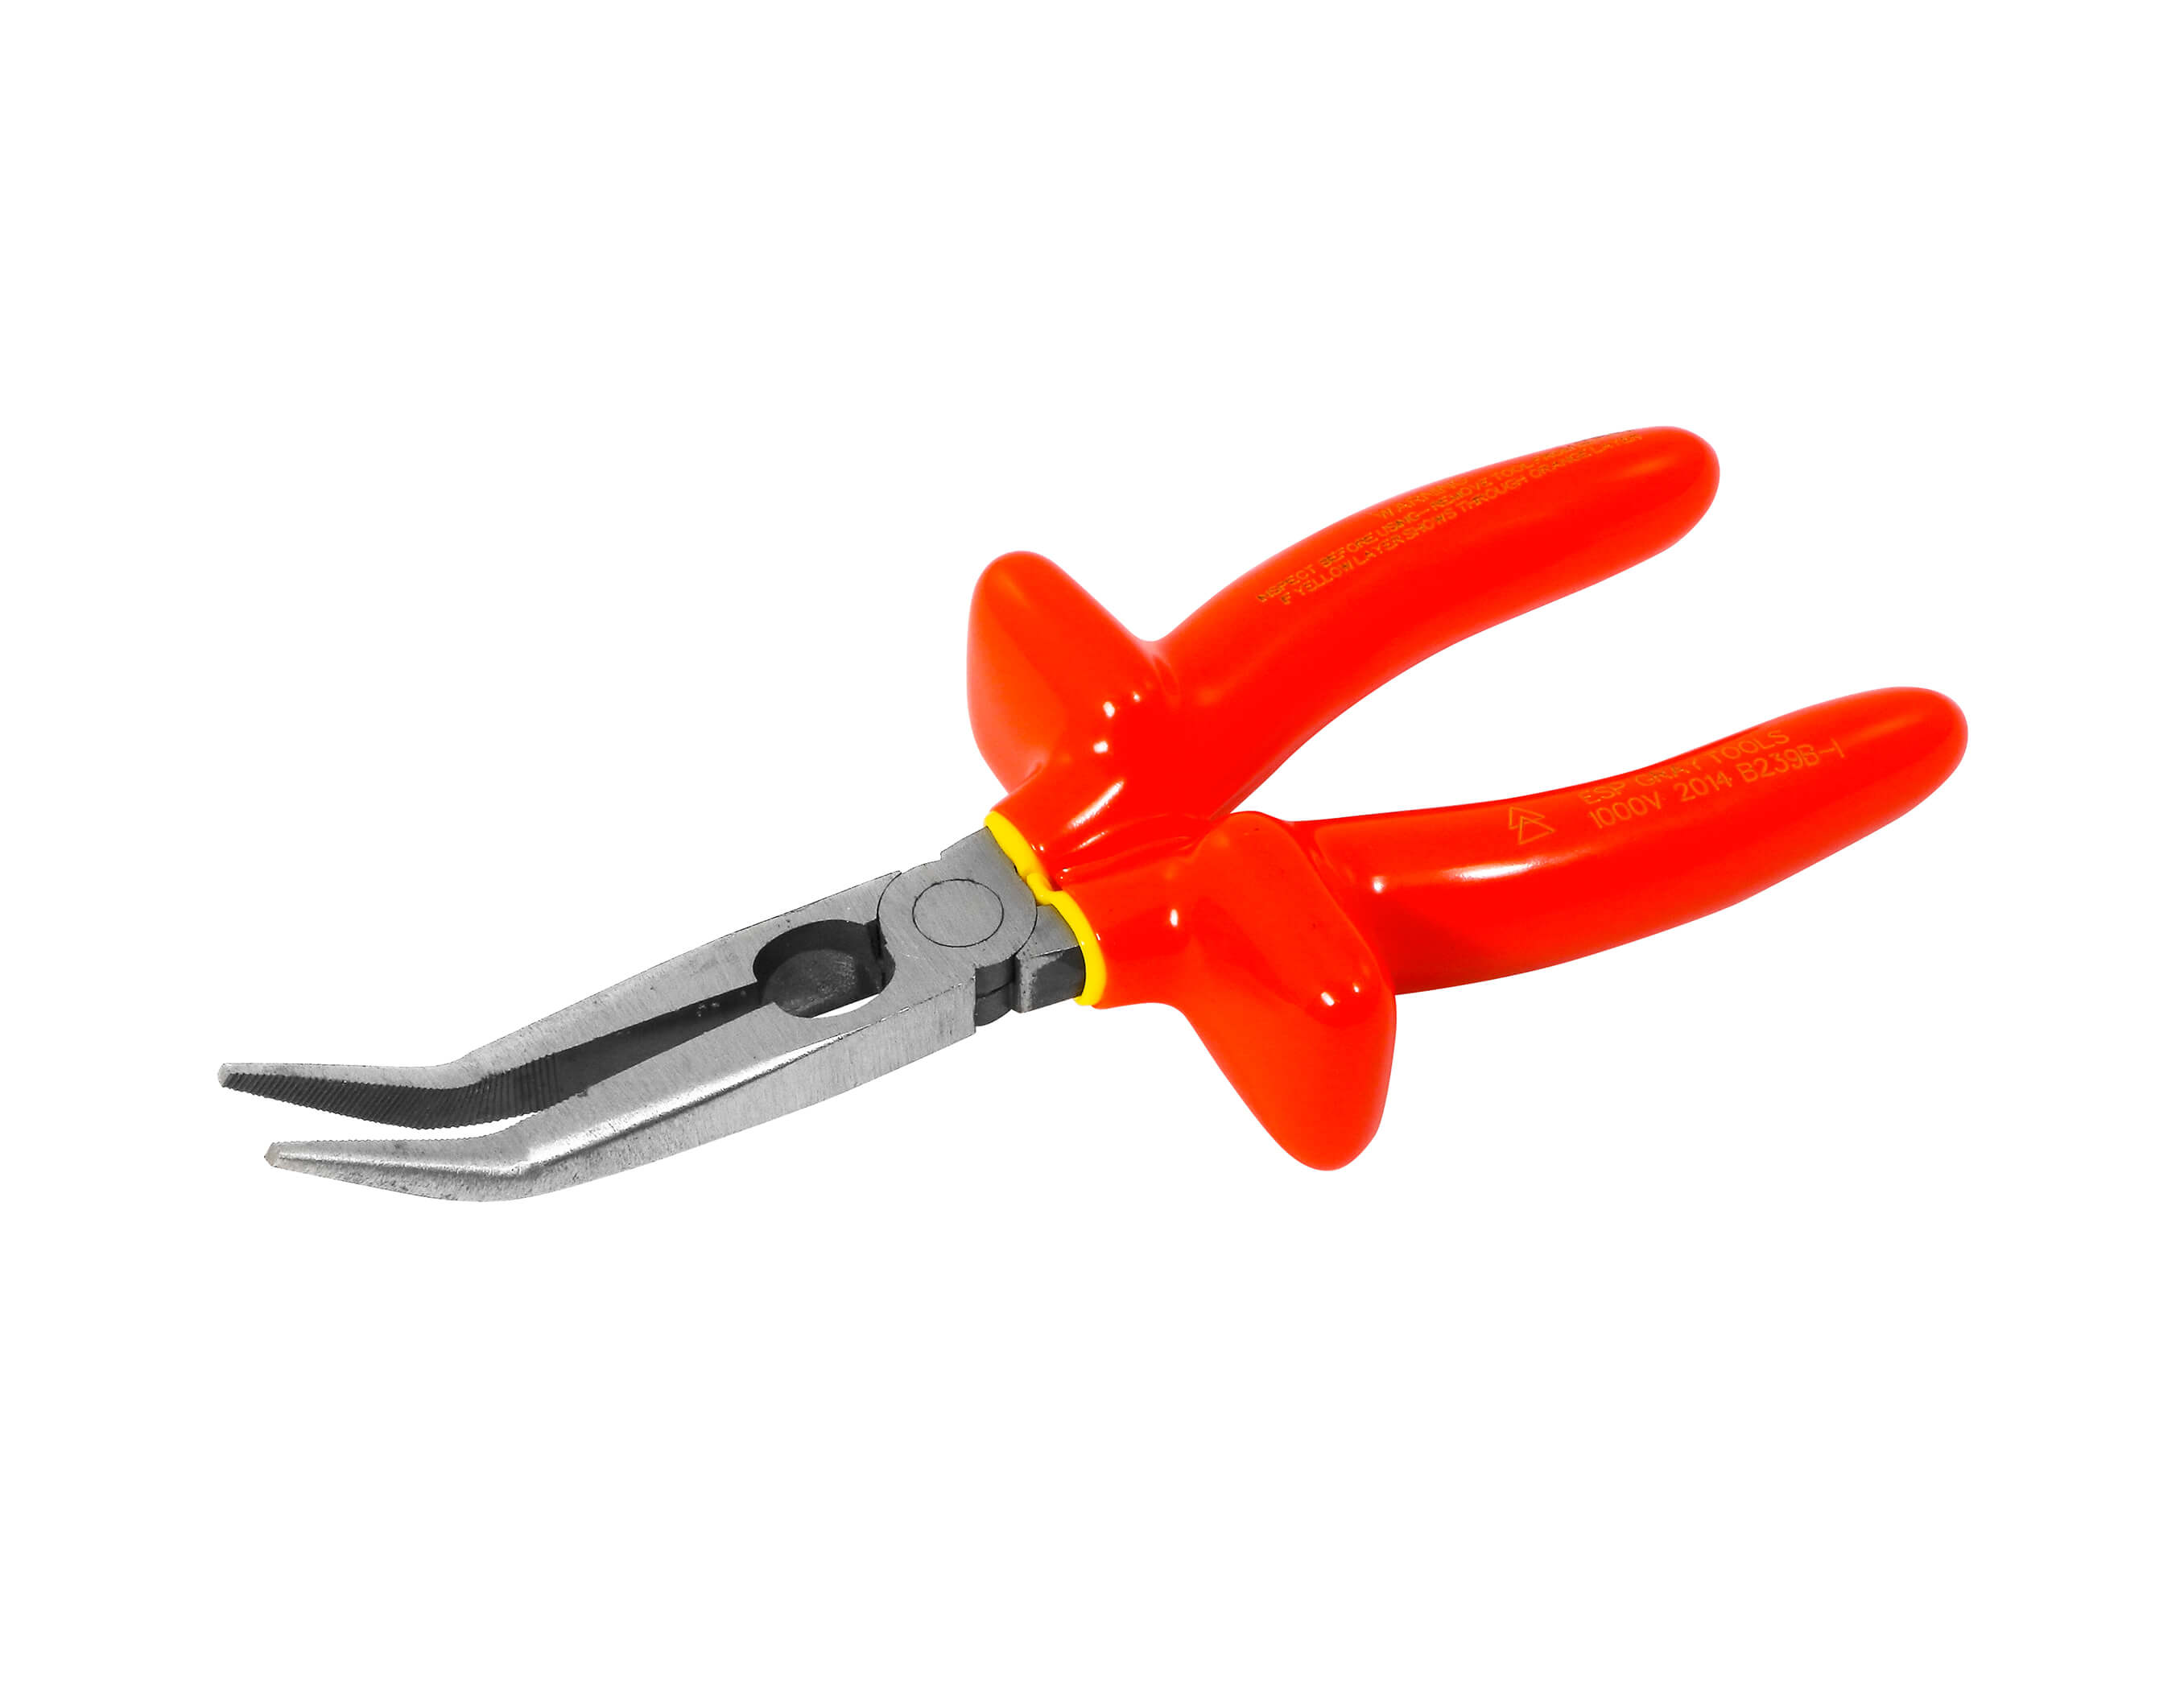 INSULATED NEEDLE NOSE PLIERS ANGLED